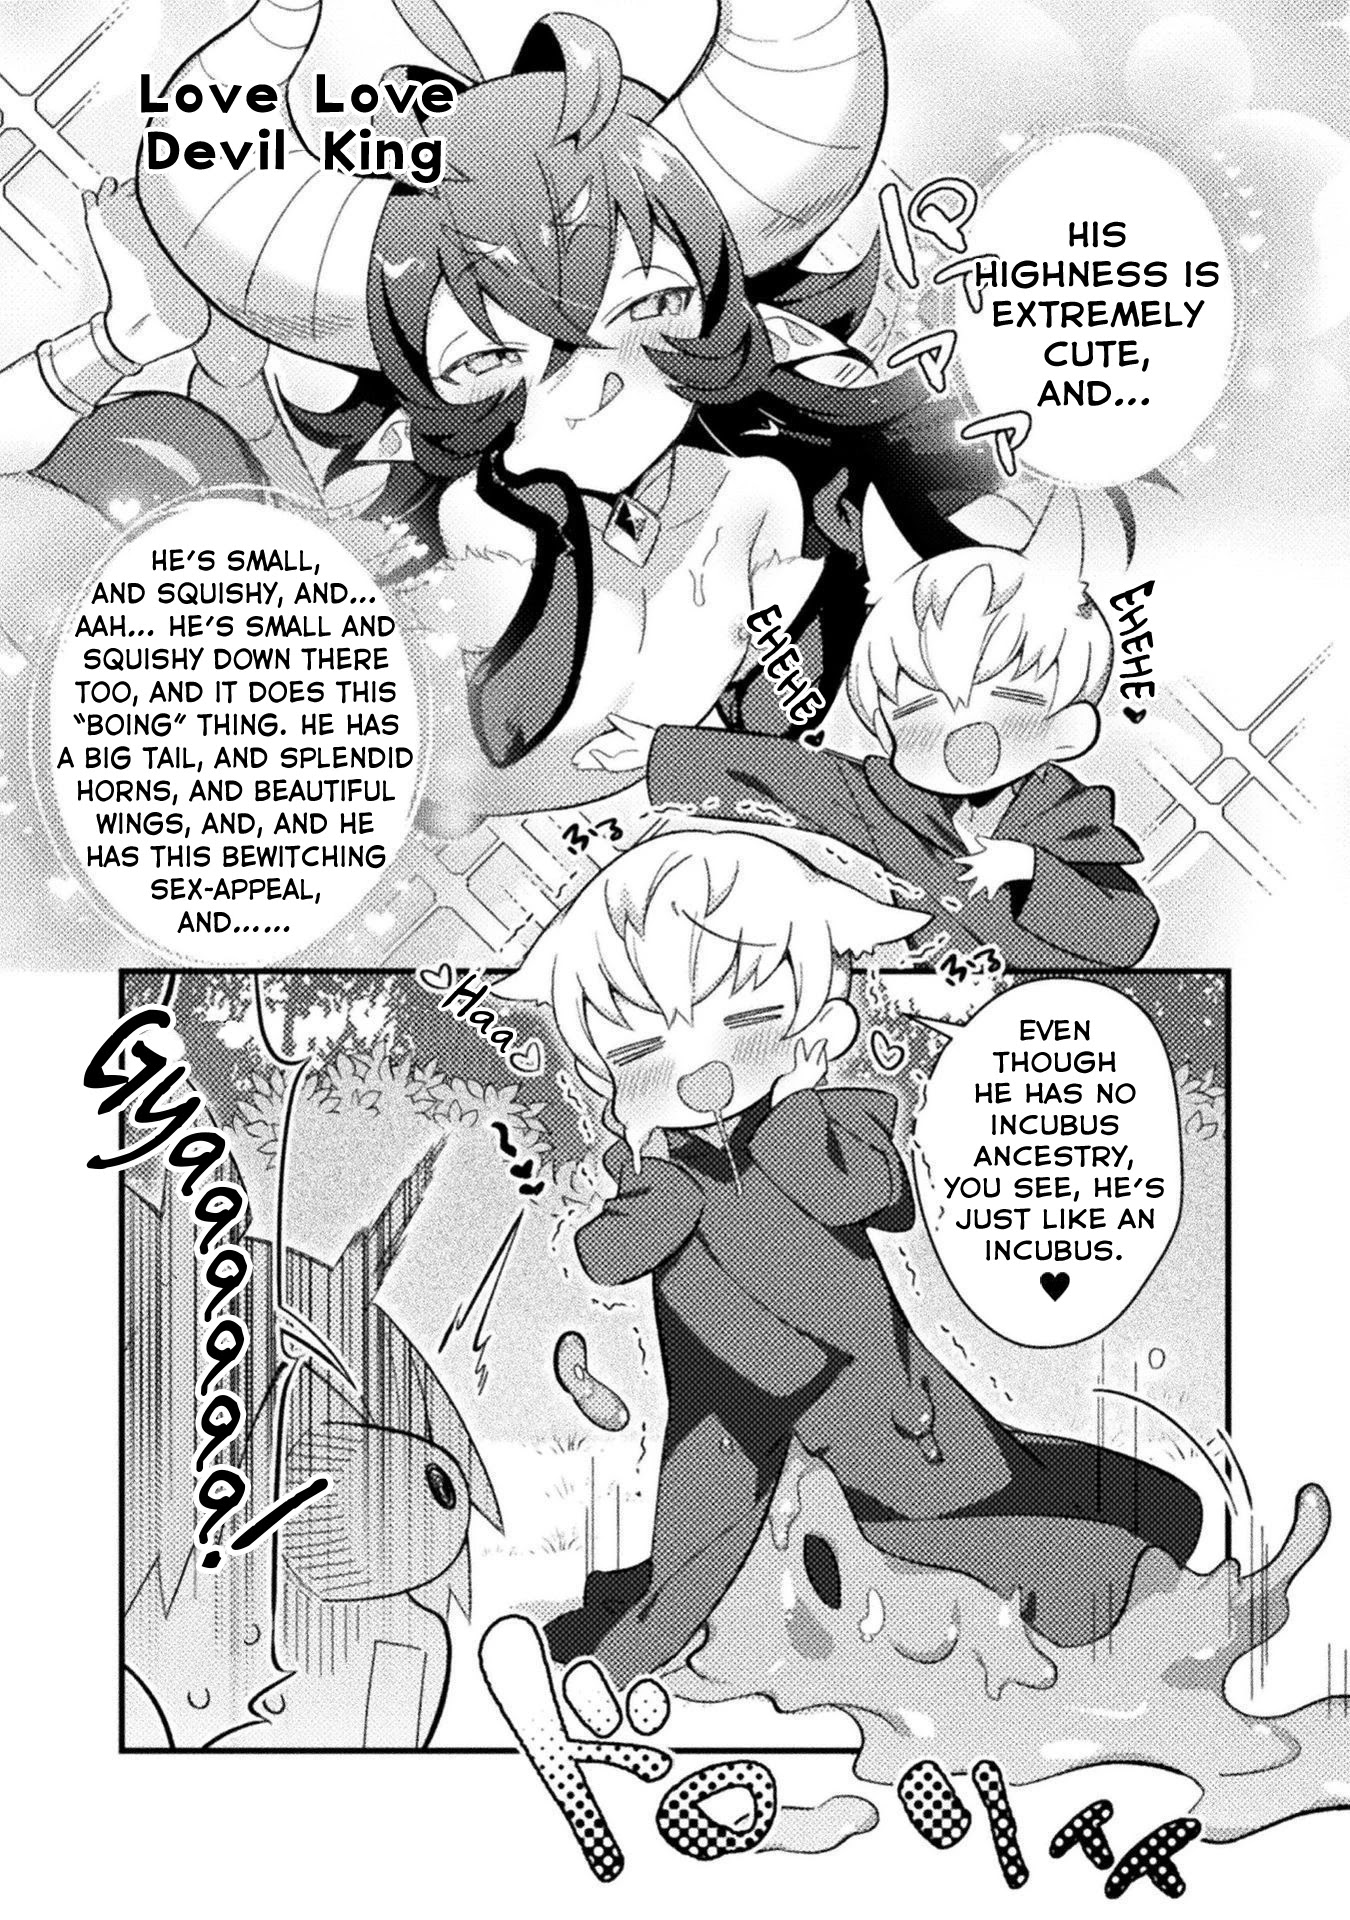 After Reincarnation, My Party Was Full Of Traps, But I'm Not A Shotacon! - 14 page 9